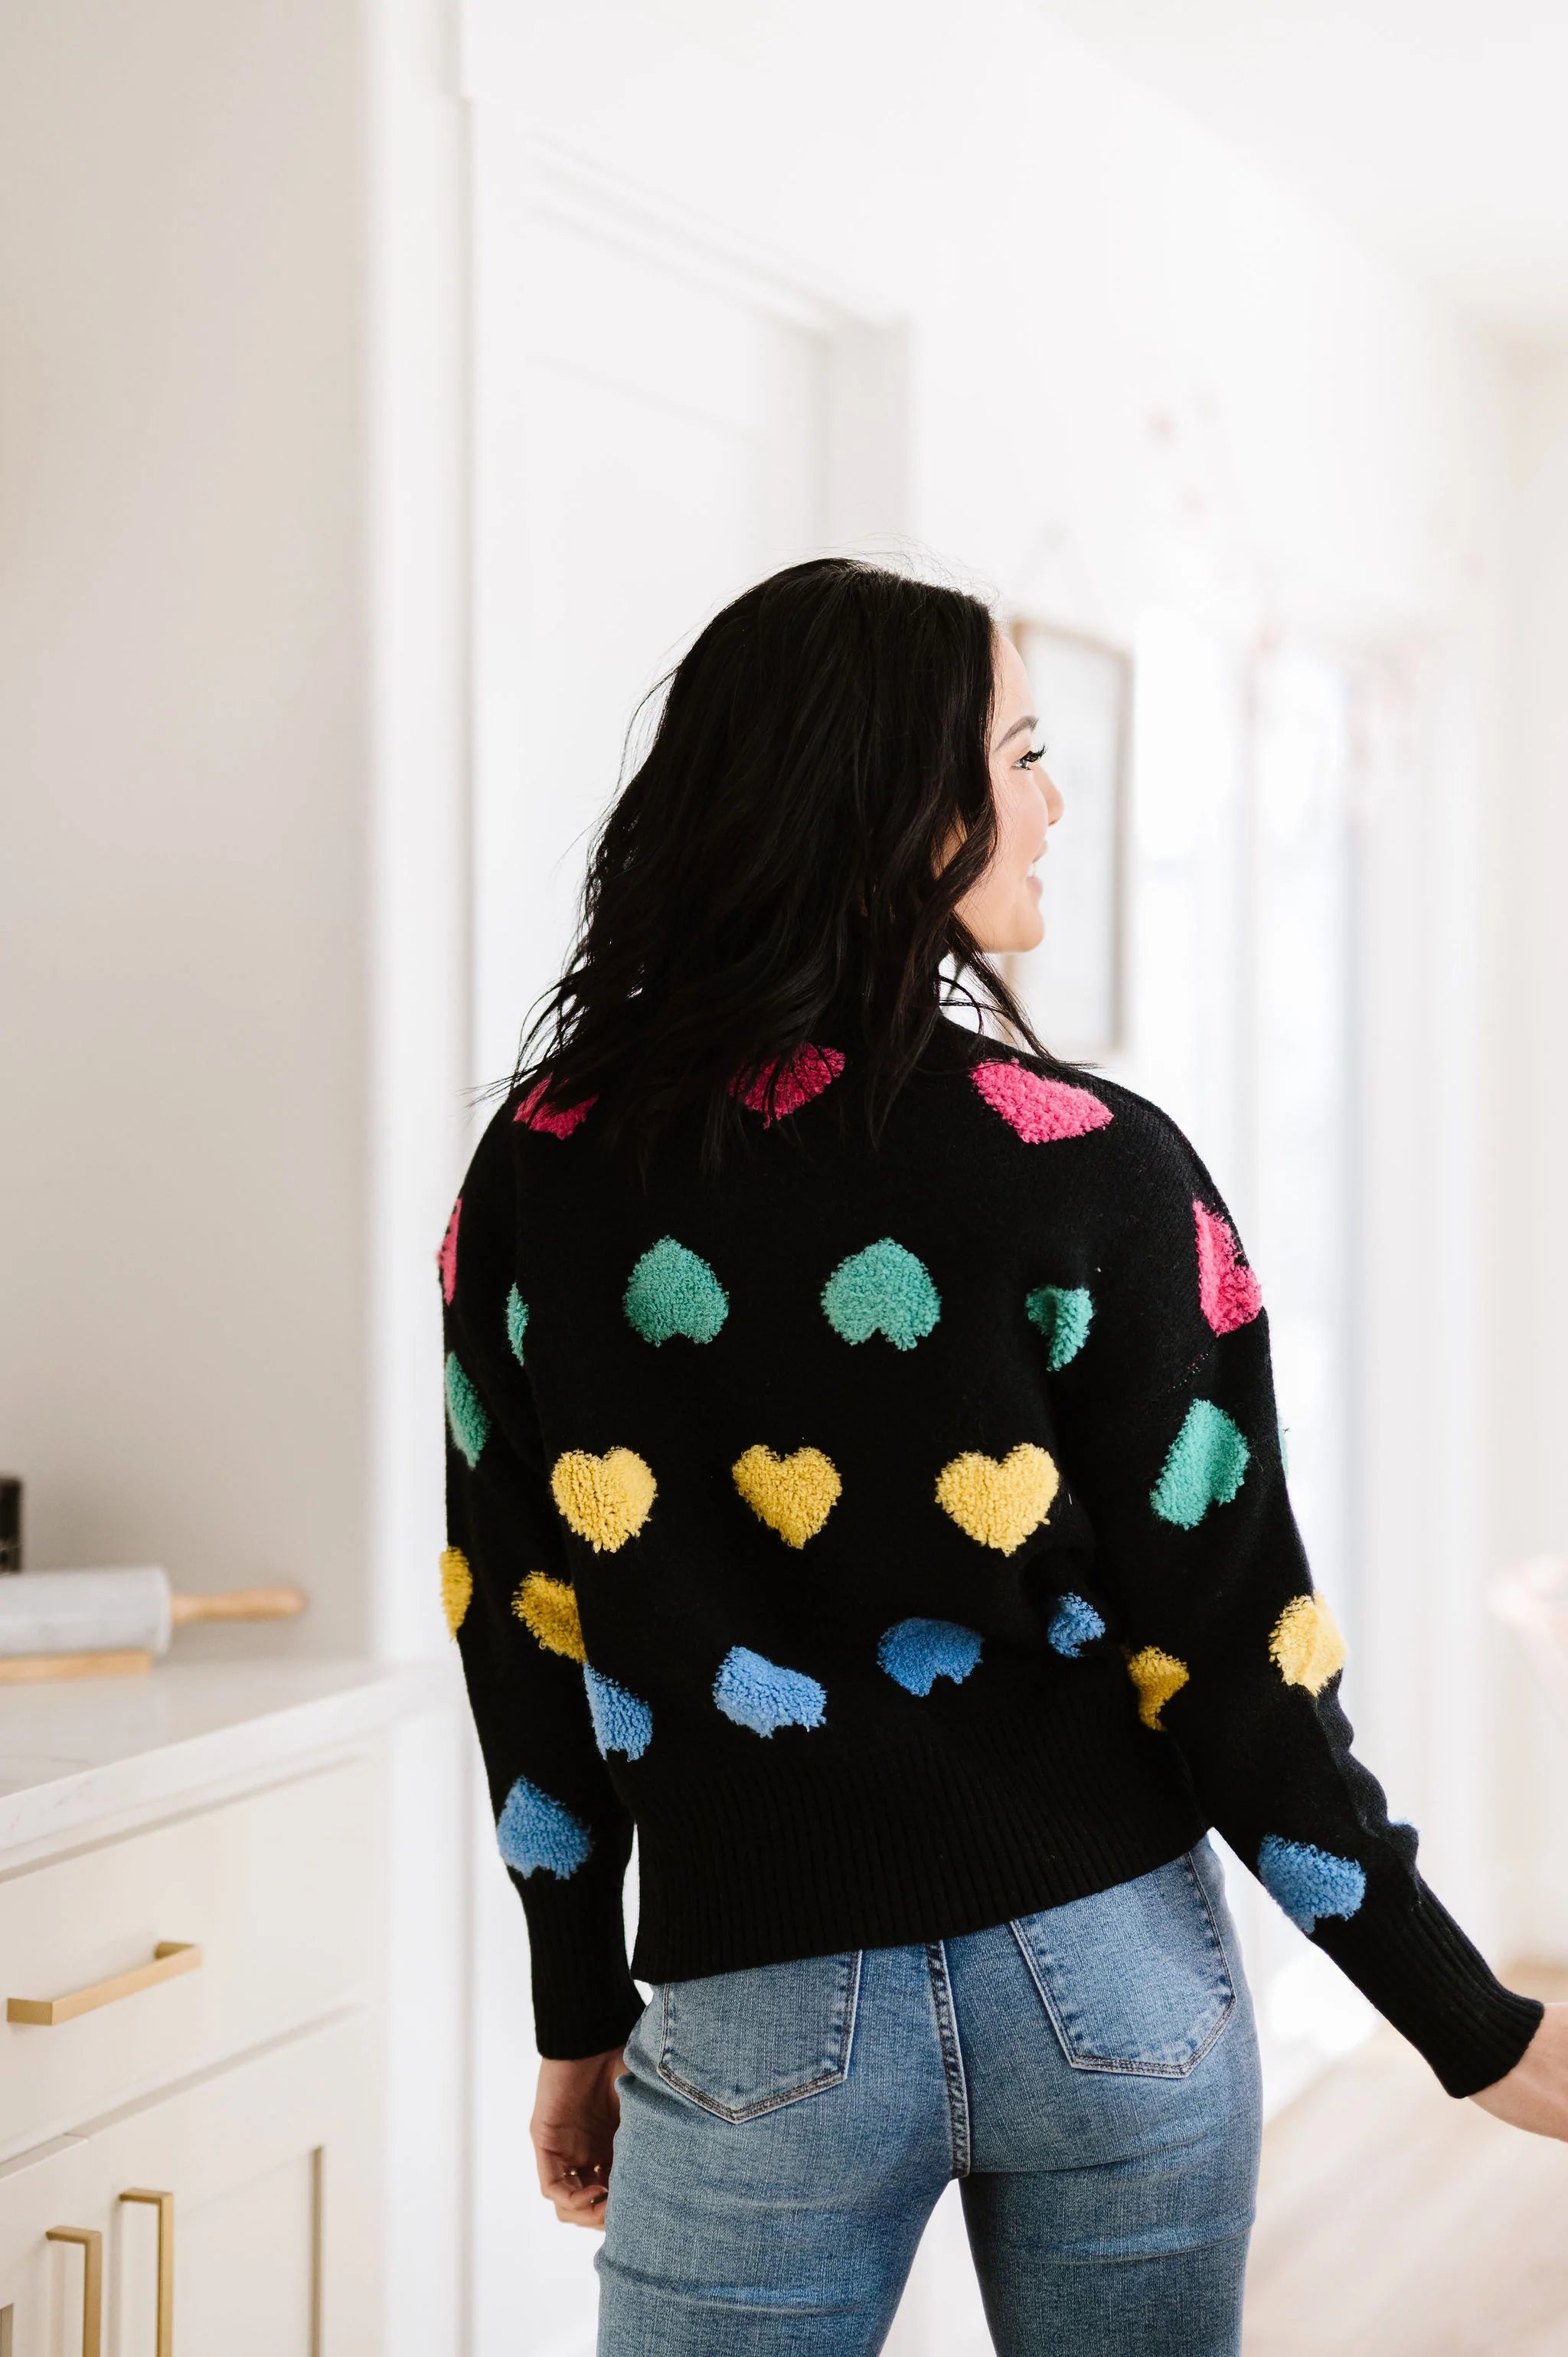 Speak To Your Heart Sweater